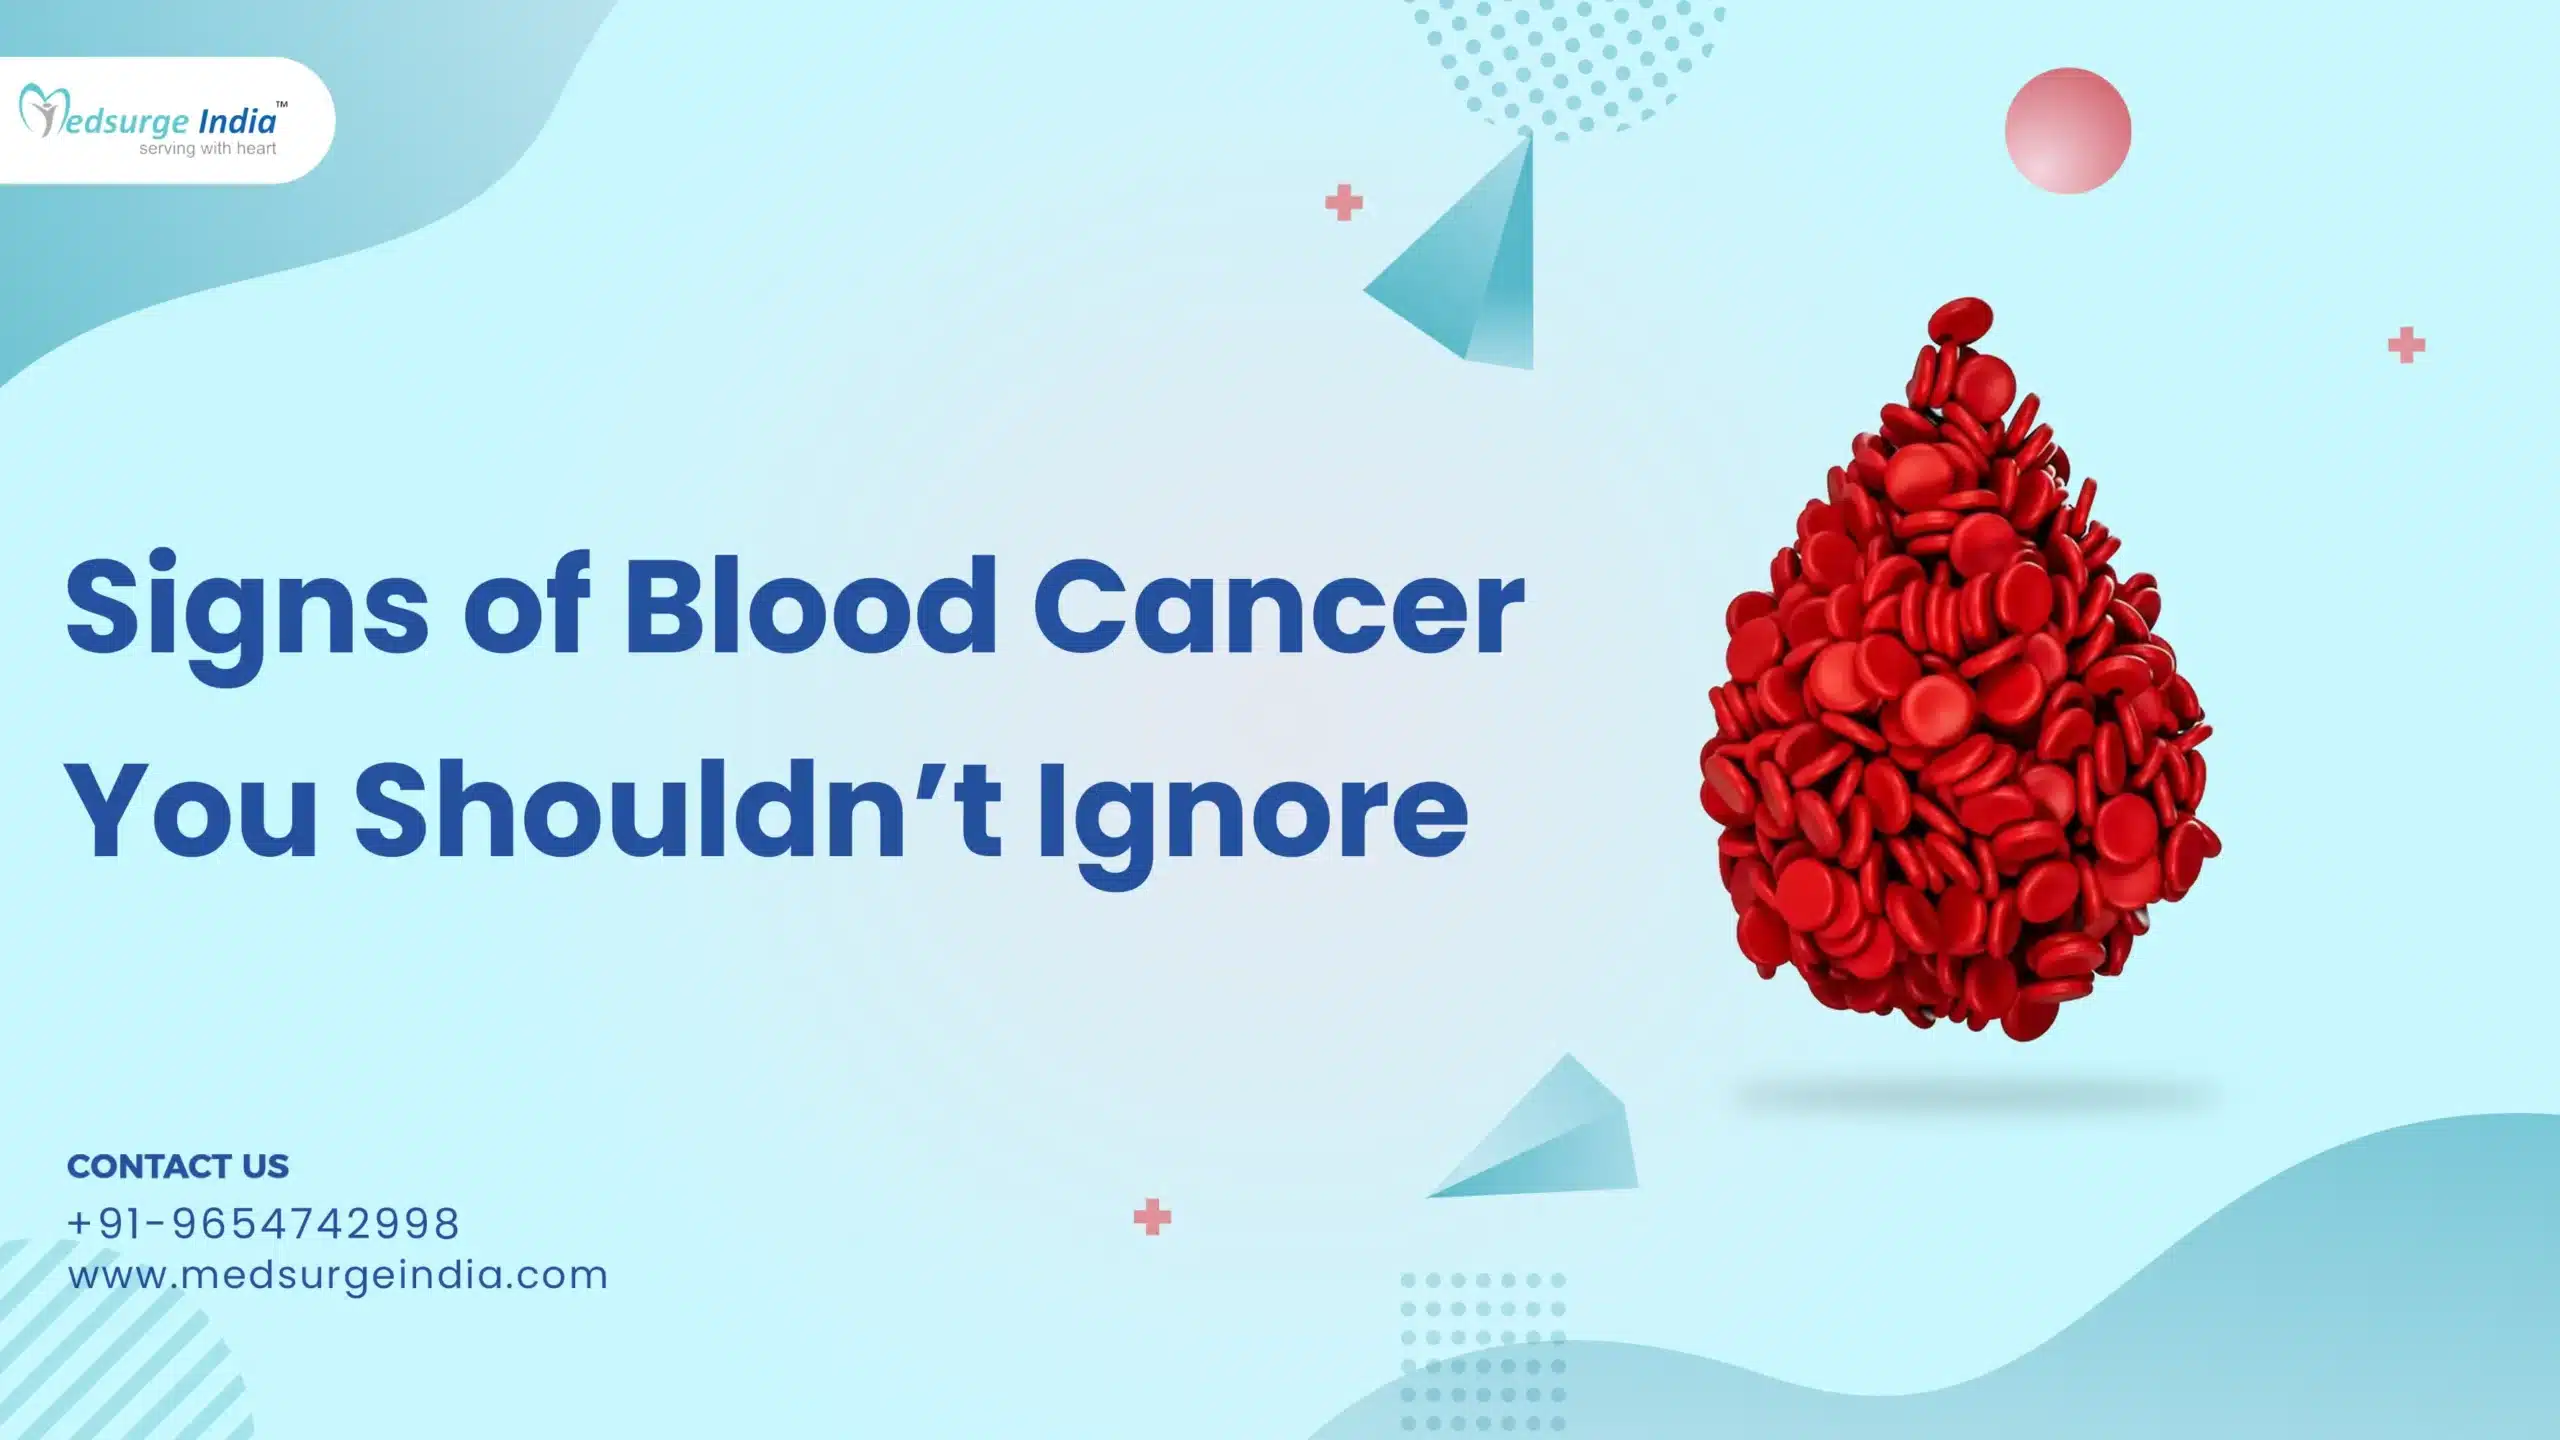 Signs of Blood Cancer You Shouldn’t Ignore